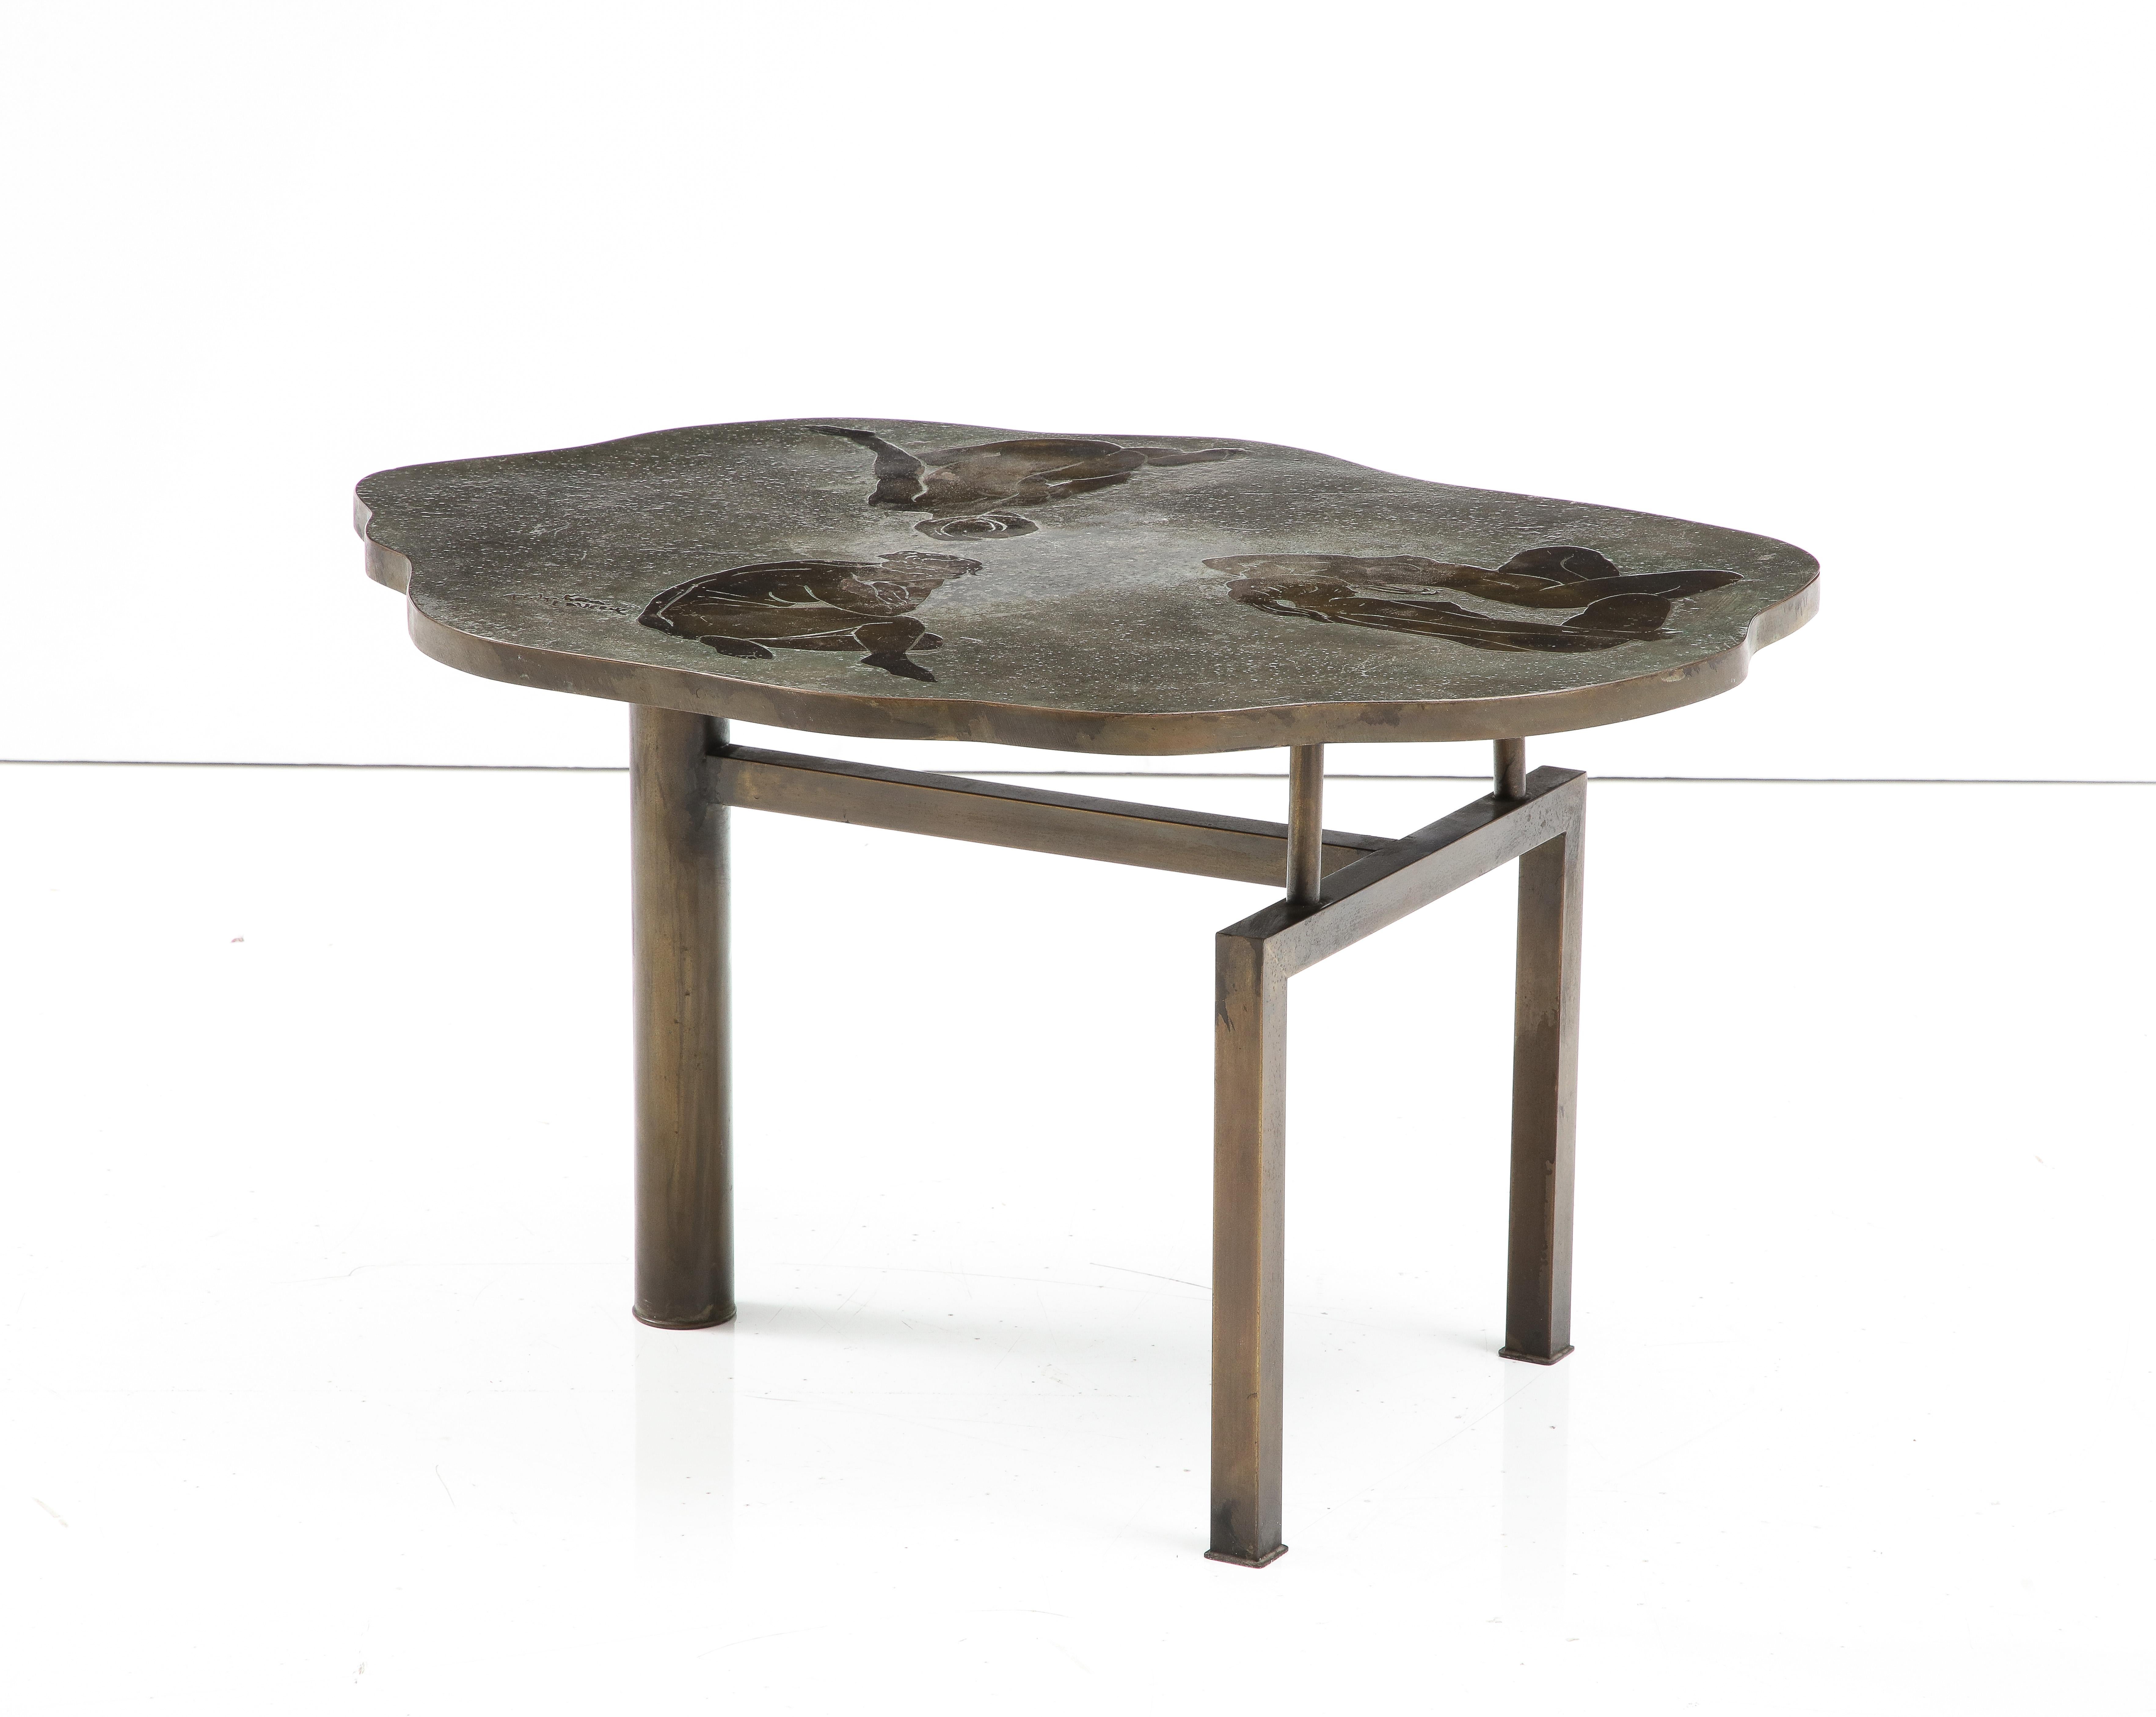 “The Bathers”, rare coffee table in patinated bronze and pewter by Philip and Kelvin LaVerne, American 1960s. Signed on top “Kelvin + Philip LaVerne” . This design is considered one of the LaVerne’s most striking and important figural designs. The